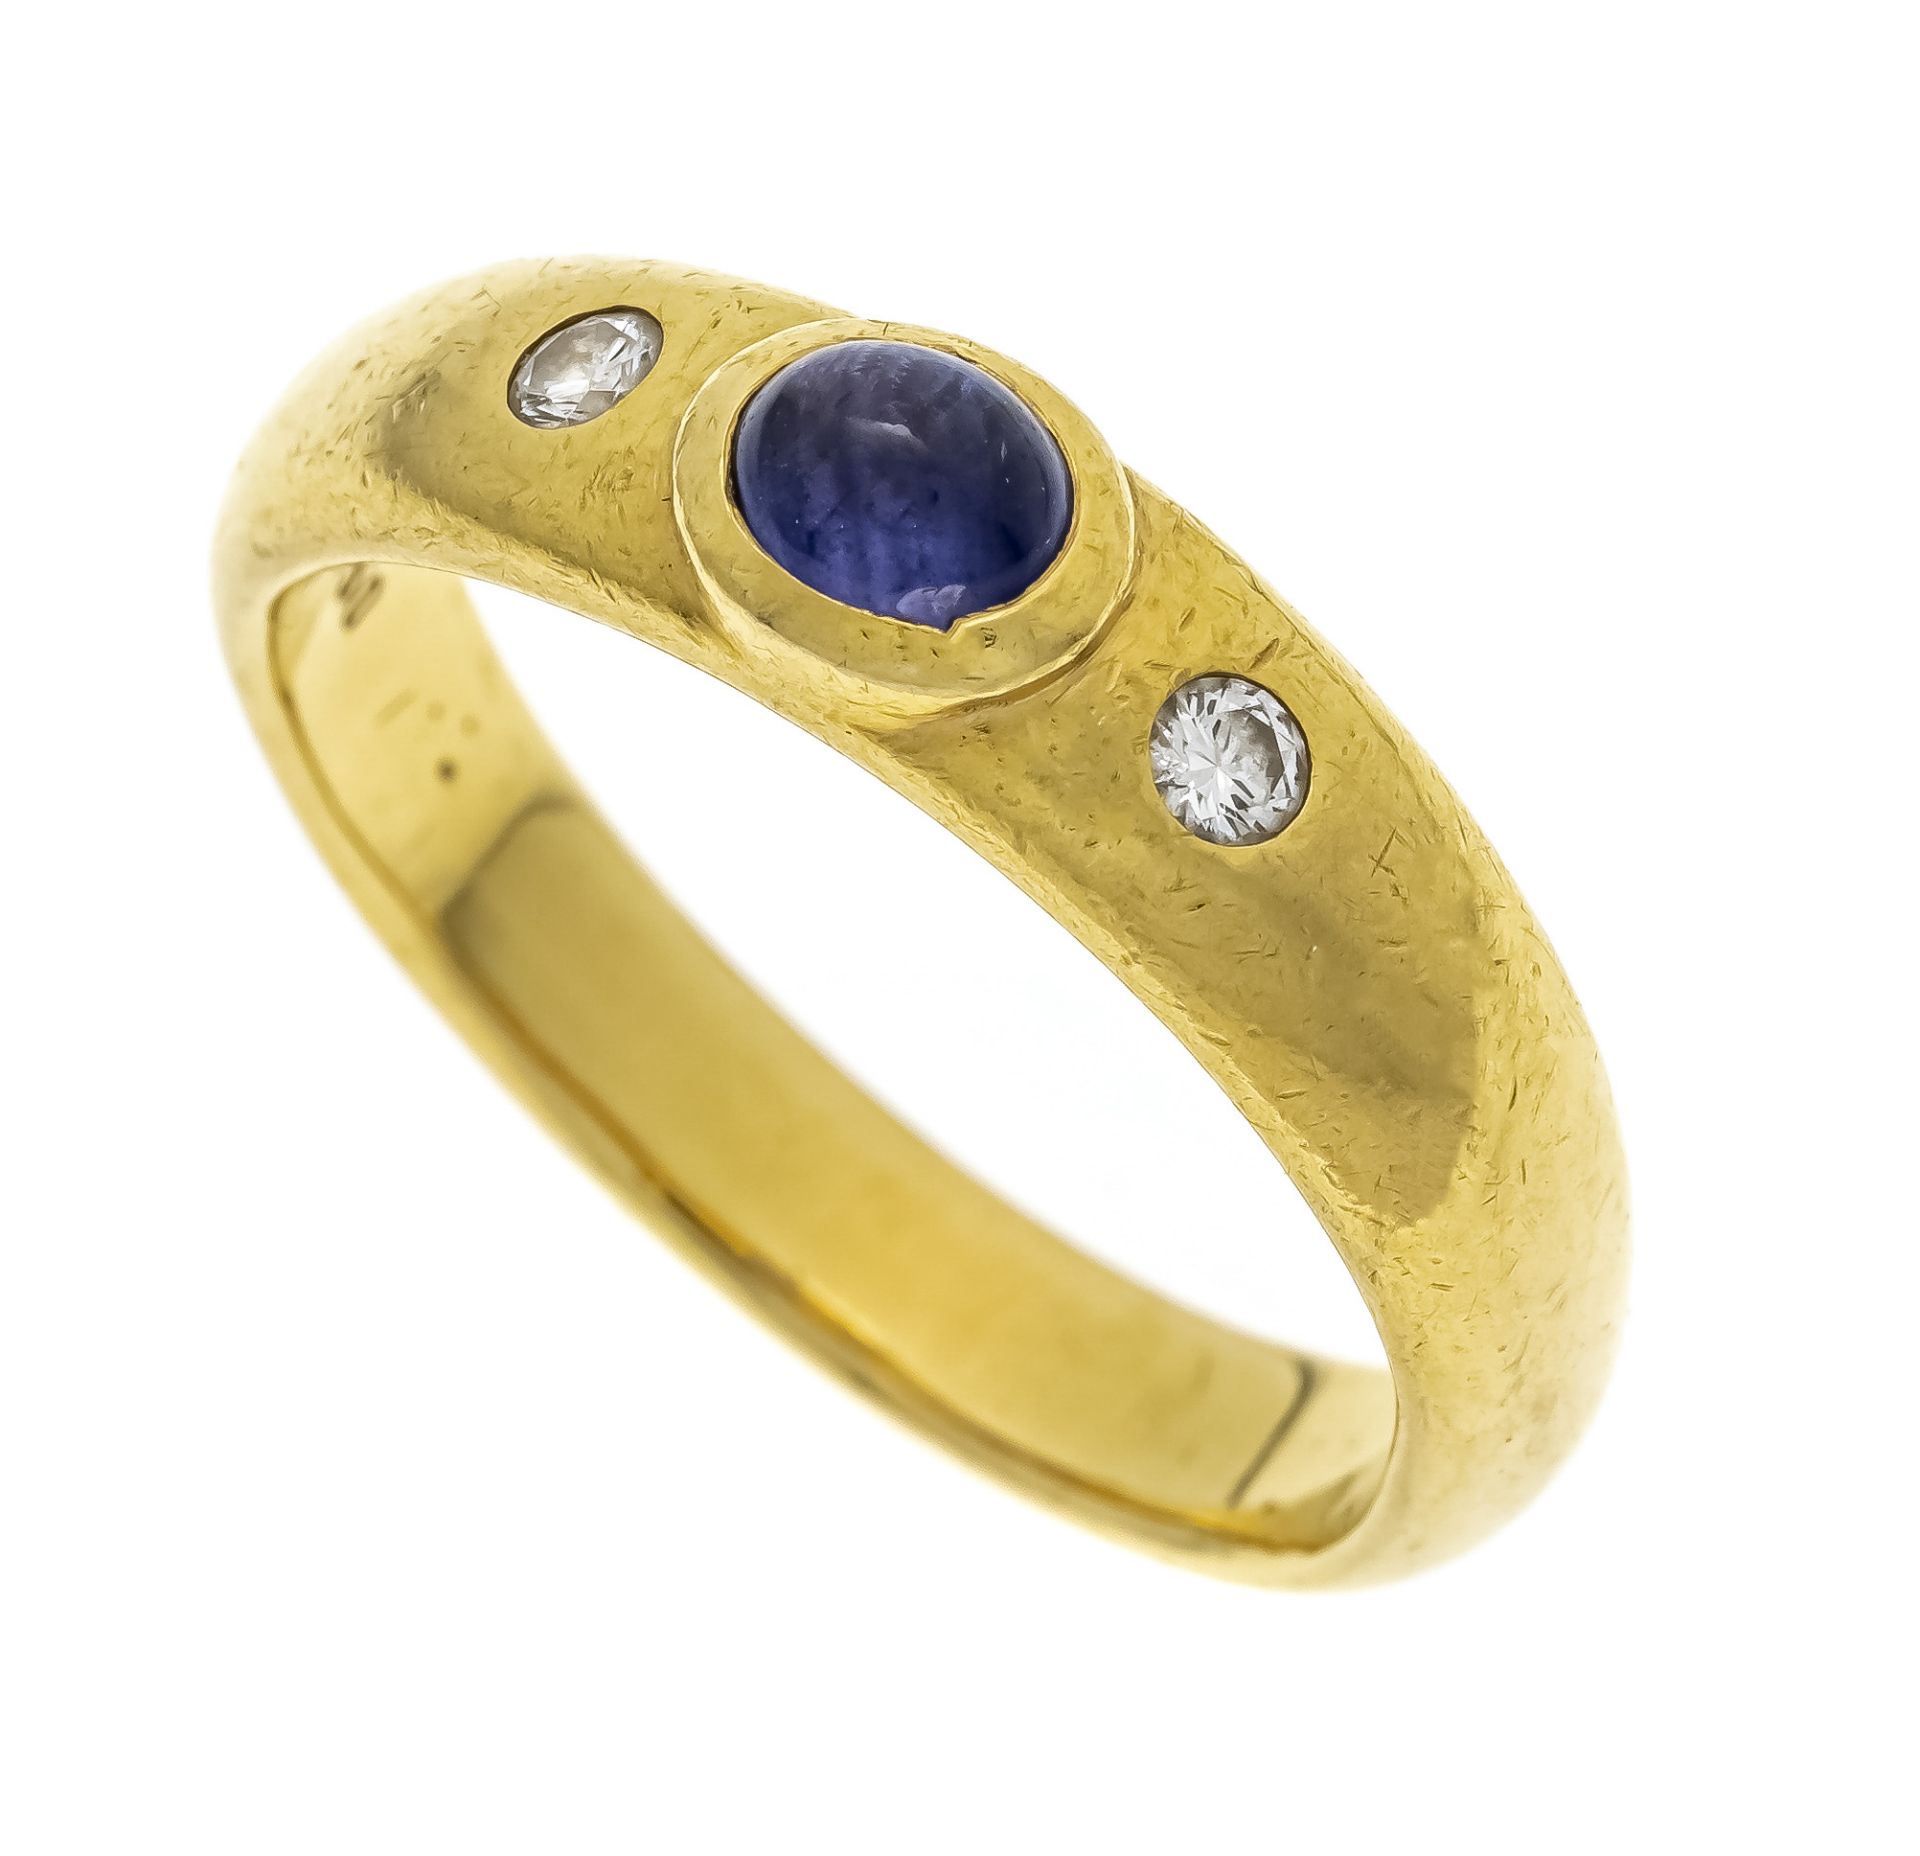 Sapphire diamond band ring GG 750/000 with an oval sapphire cabochon 4.9 x 4.0 mm, blue, translucent